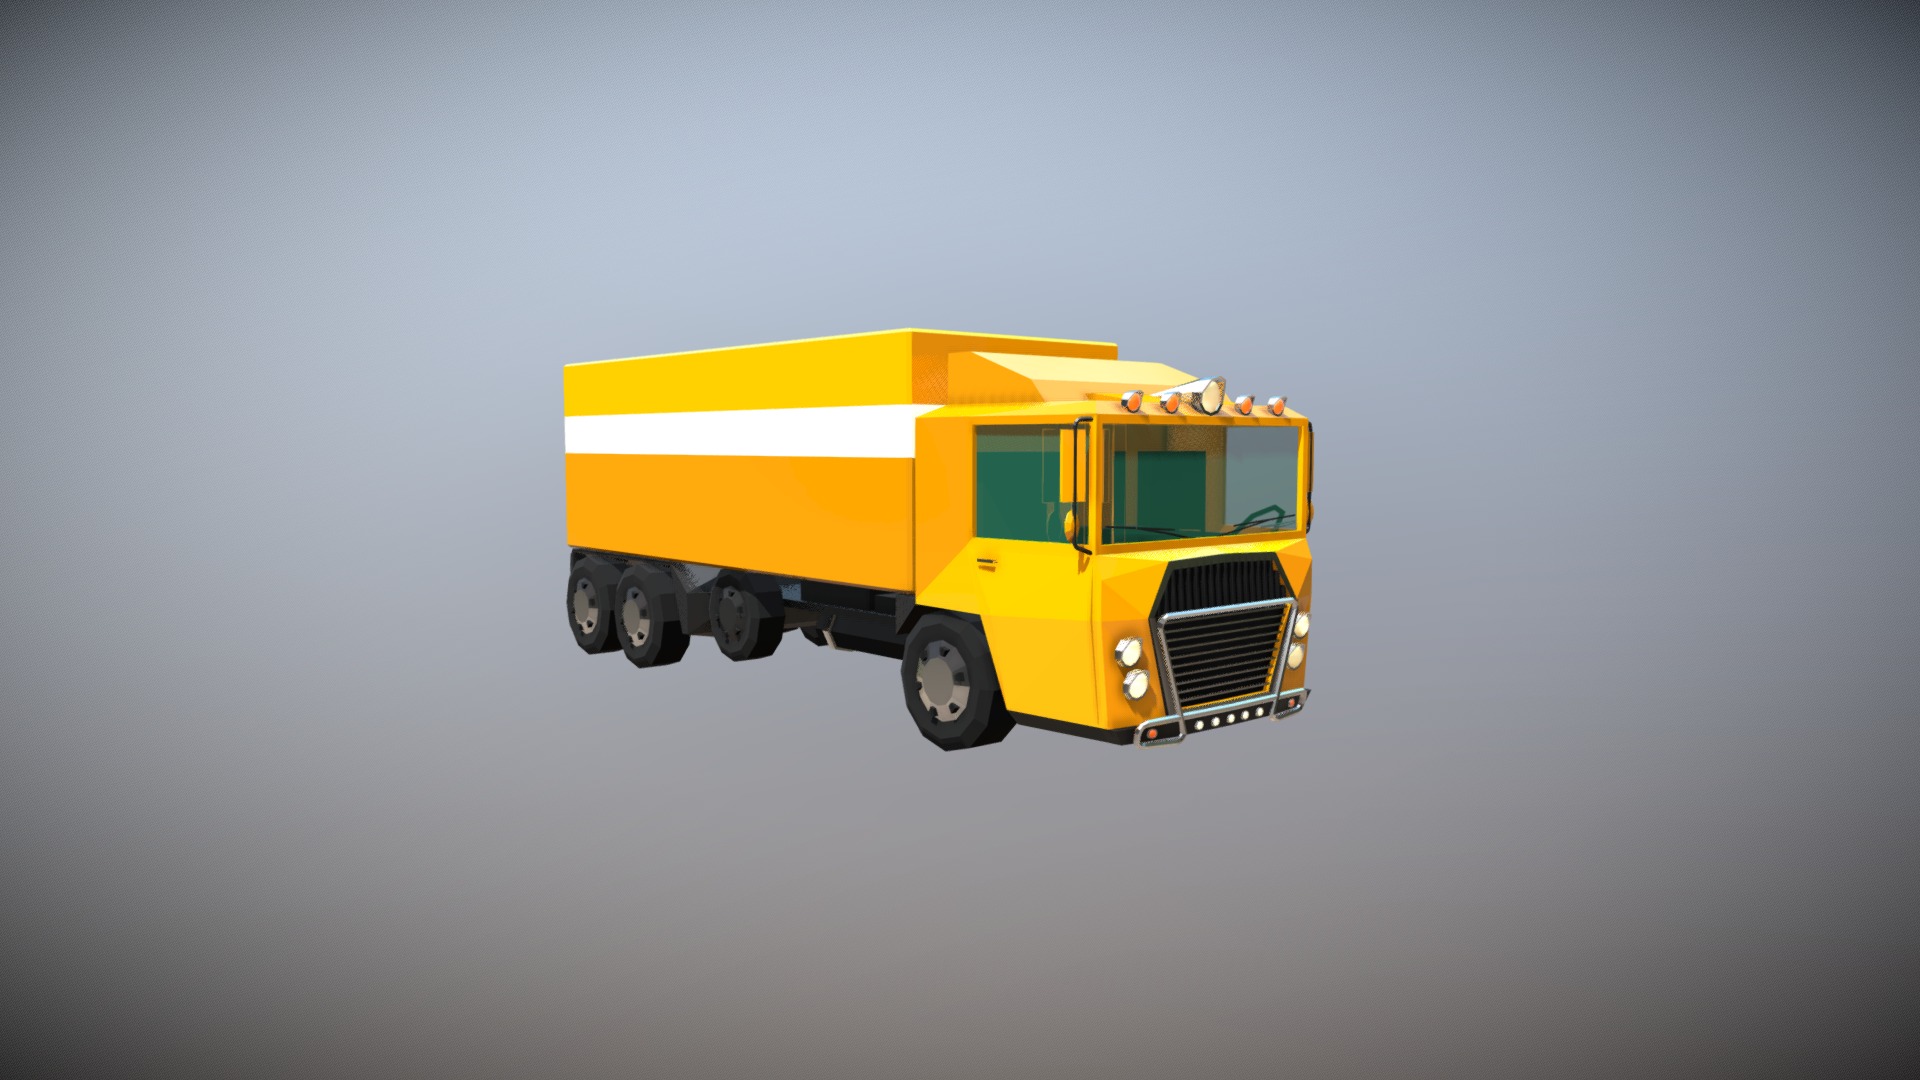 3D model Low Poly Cargo Truck - This is a 3D model of the Low Poly Cargo Truck. The 3D model is about a yellow truck on a grey background.